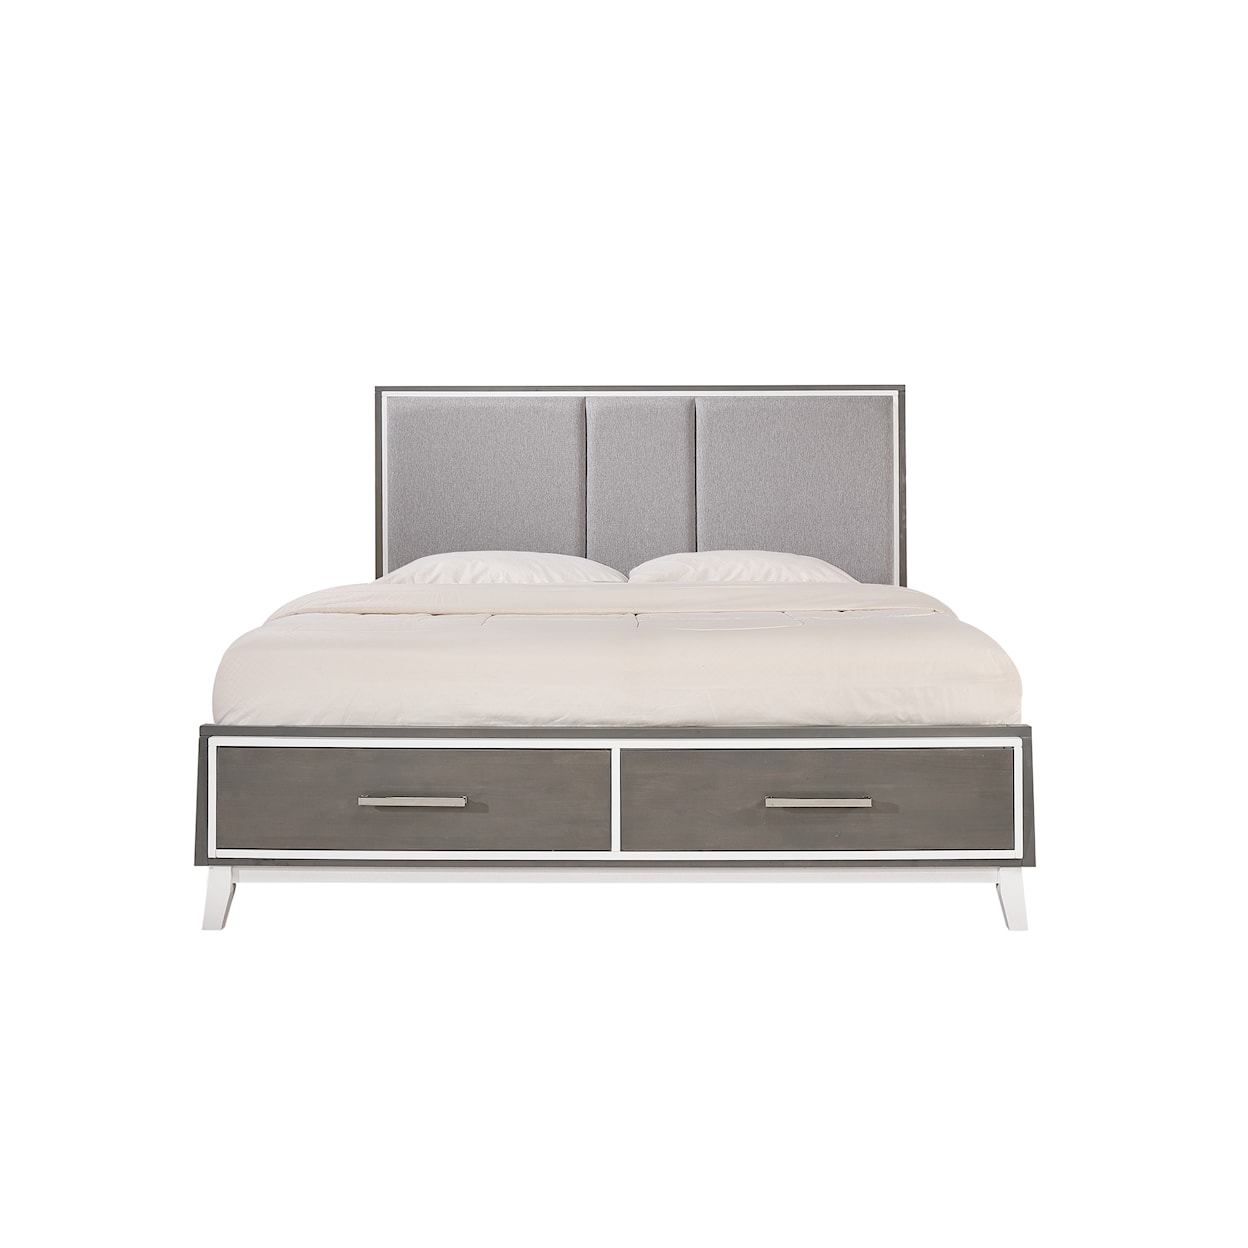 New Classic Zephyr California King Bed